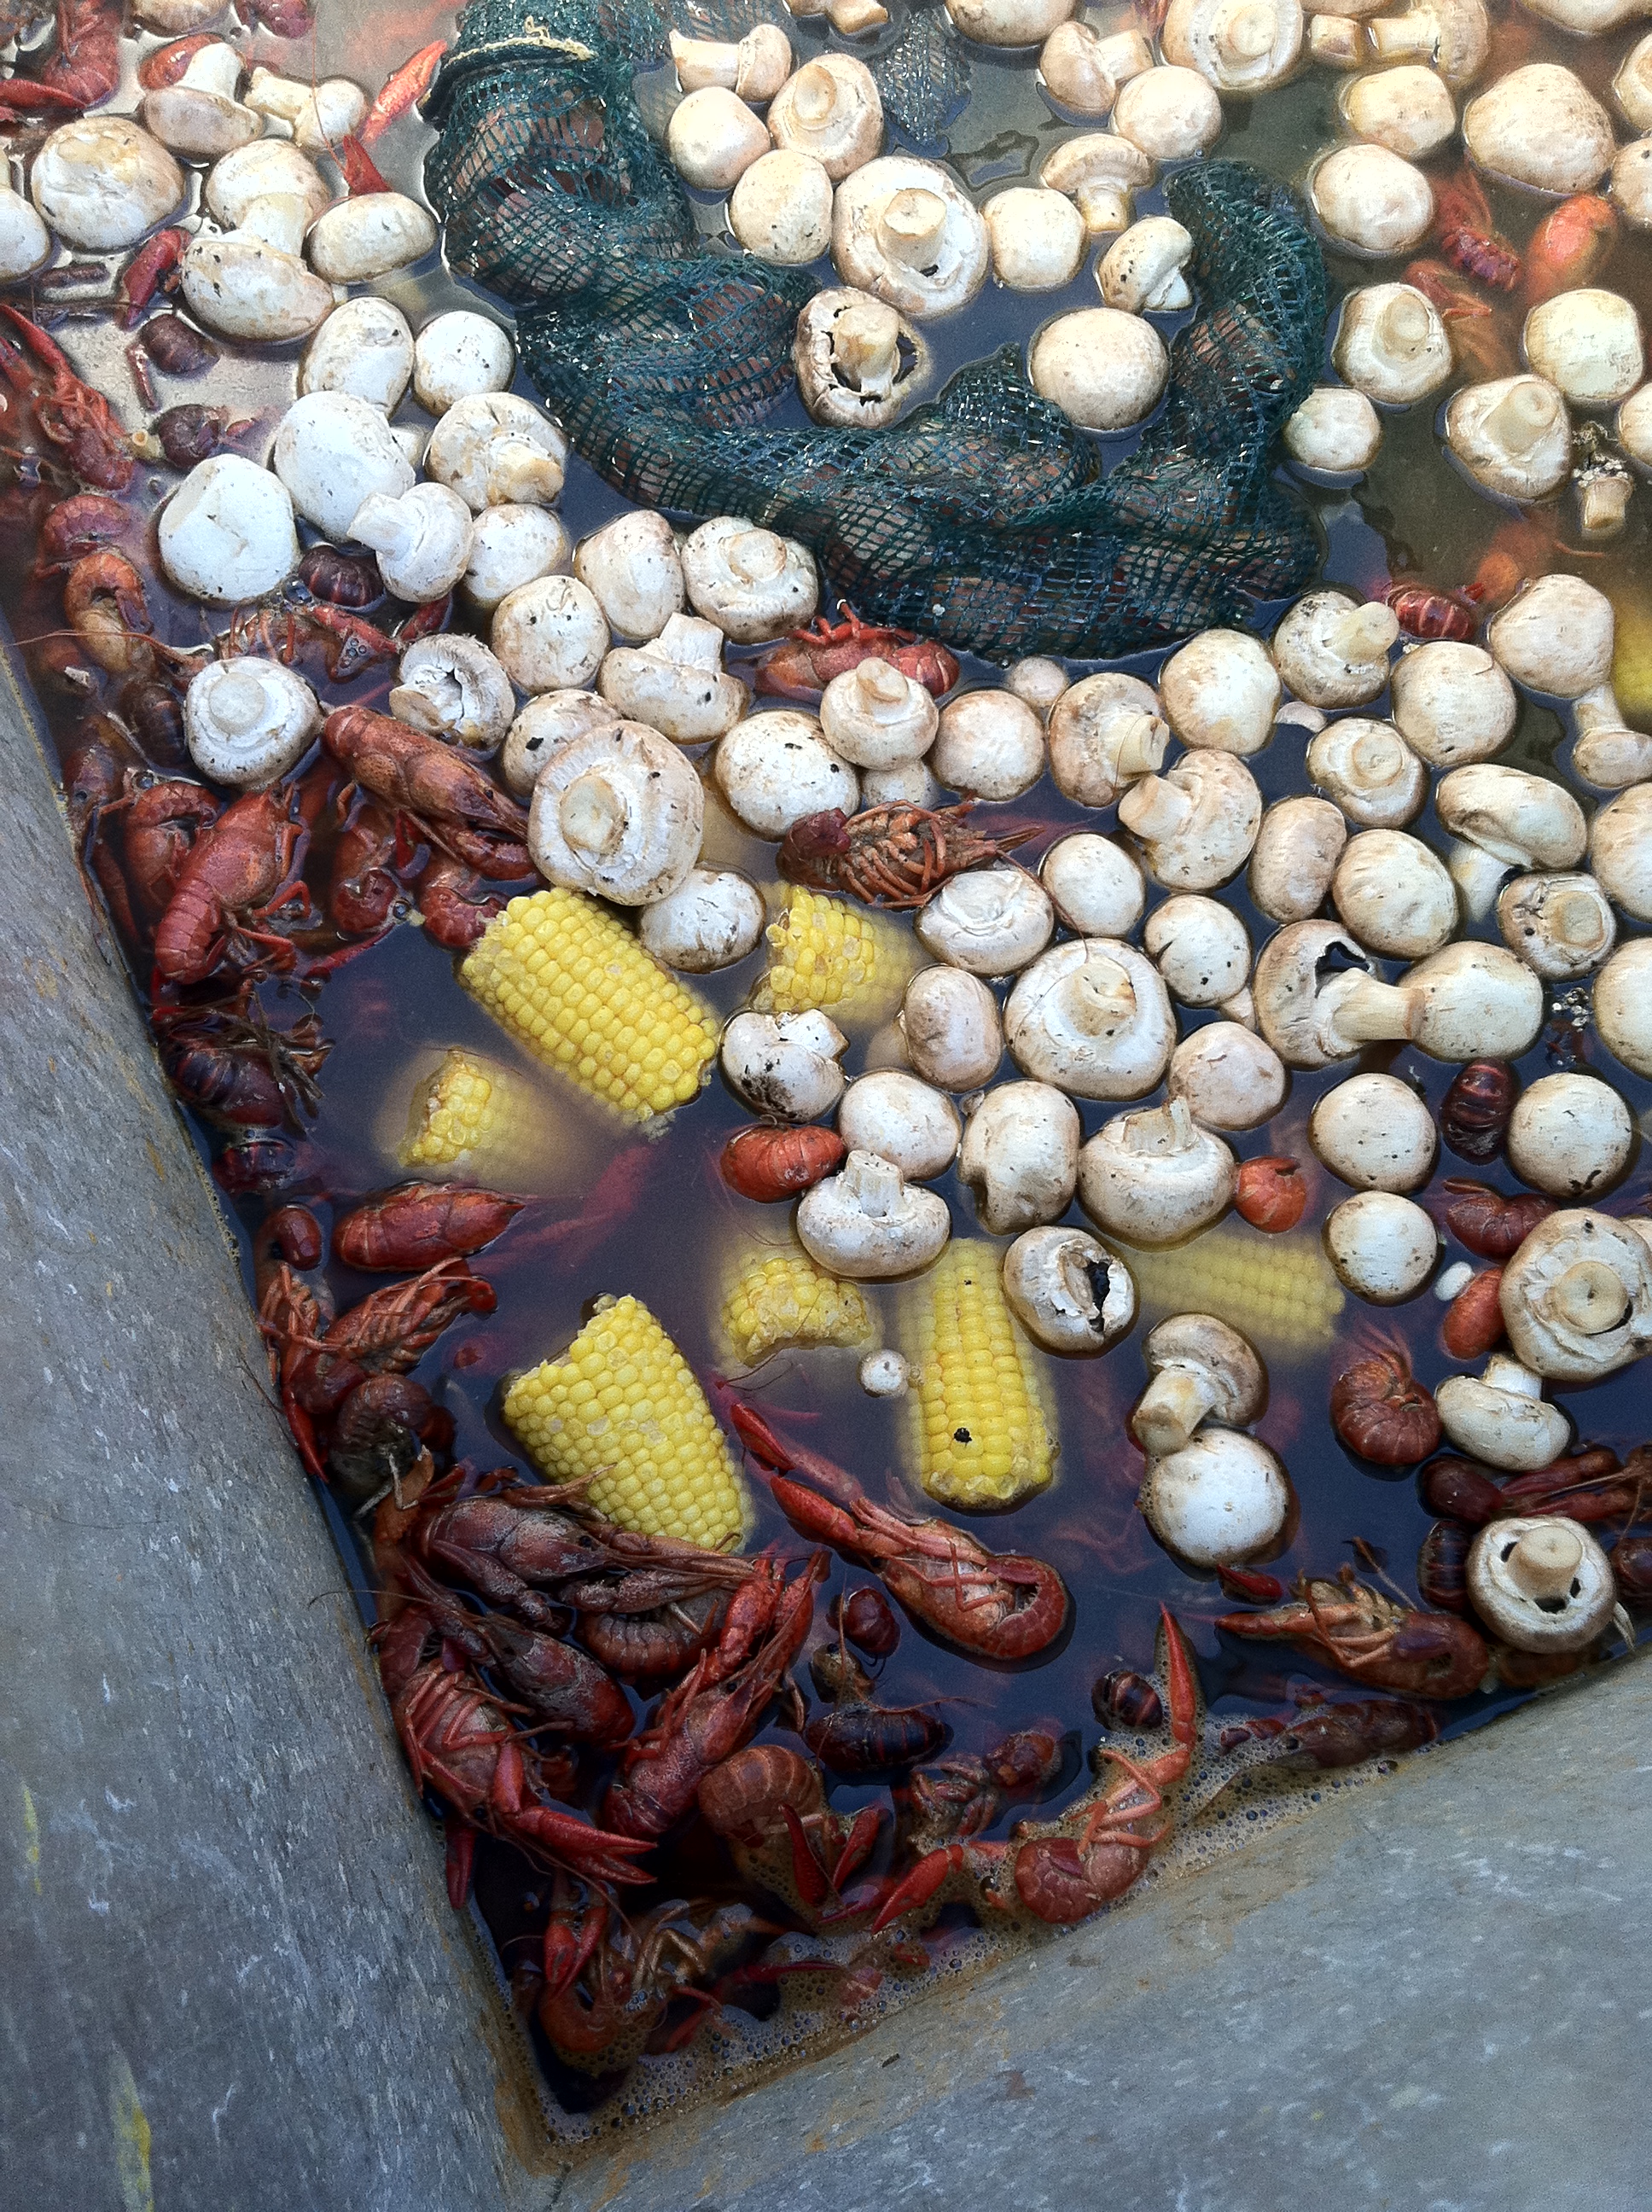 Crawfish Boil Clam Bake Low Country Boil Maryland Crab BoilIts